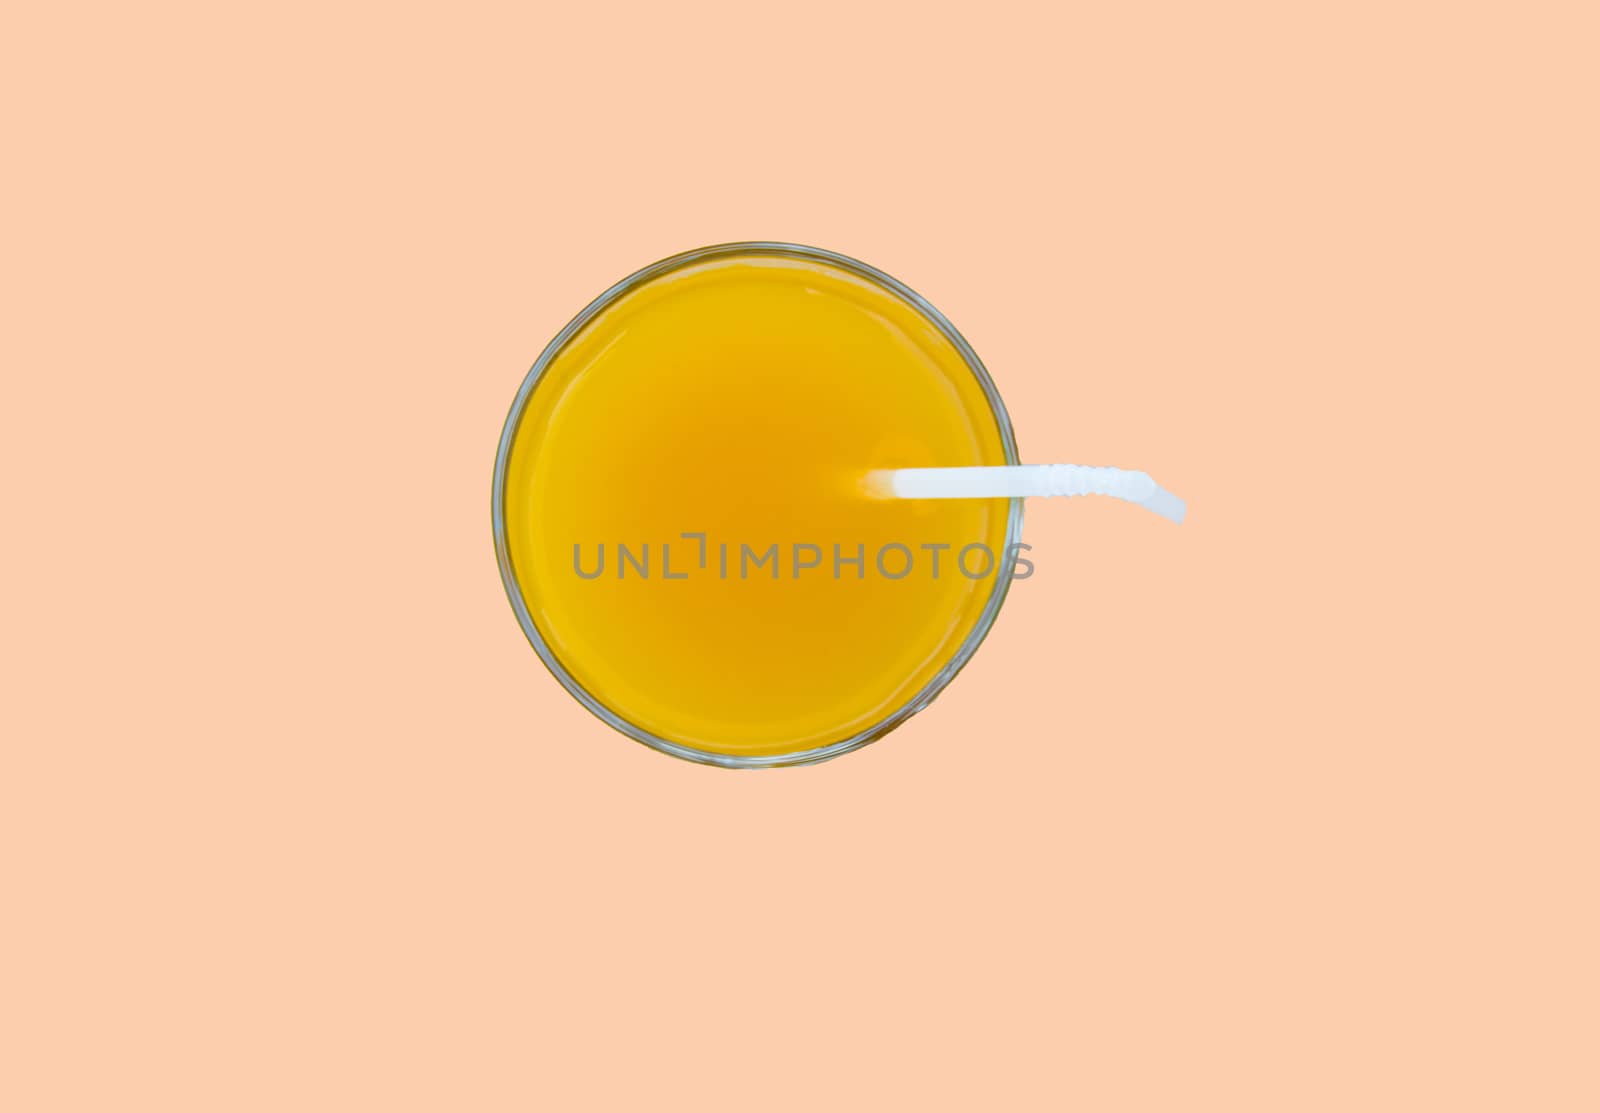 Summer drink - freshly squeezed orange juice in a glass with a straw tube, top view, isolated on a pink background with clipping, minimalism style.